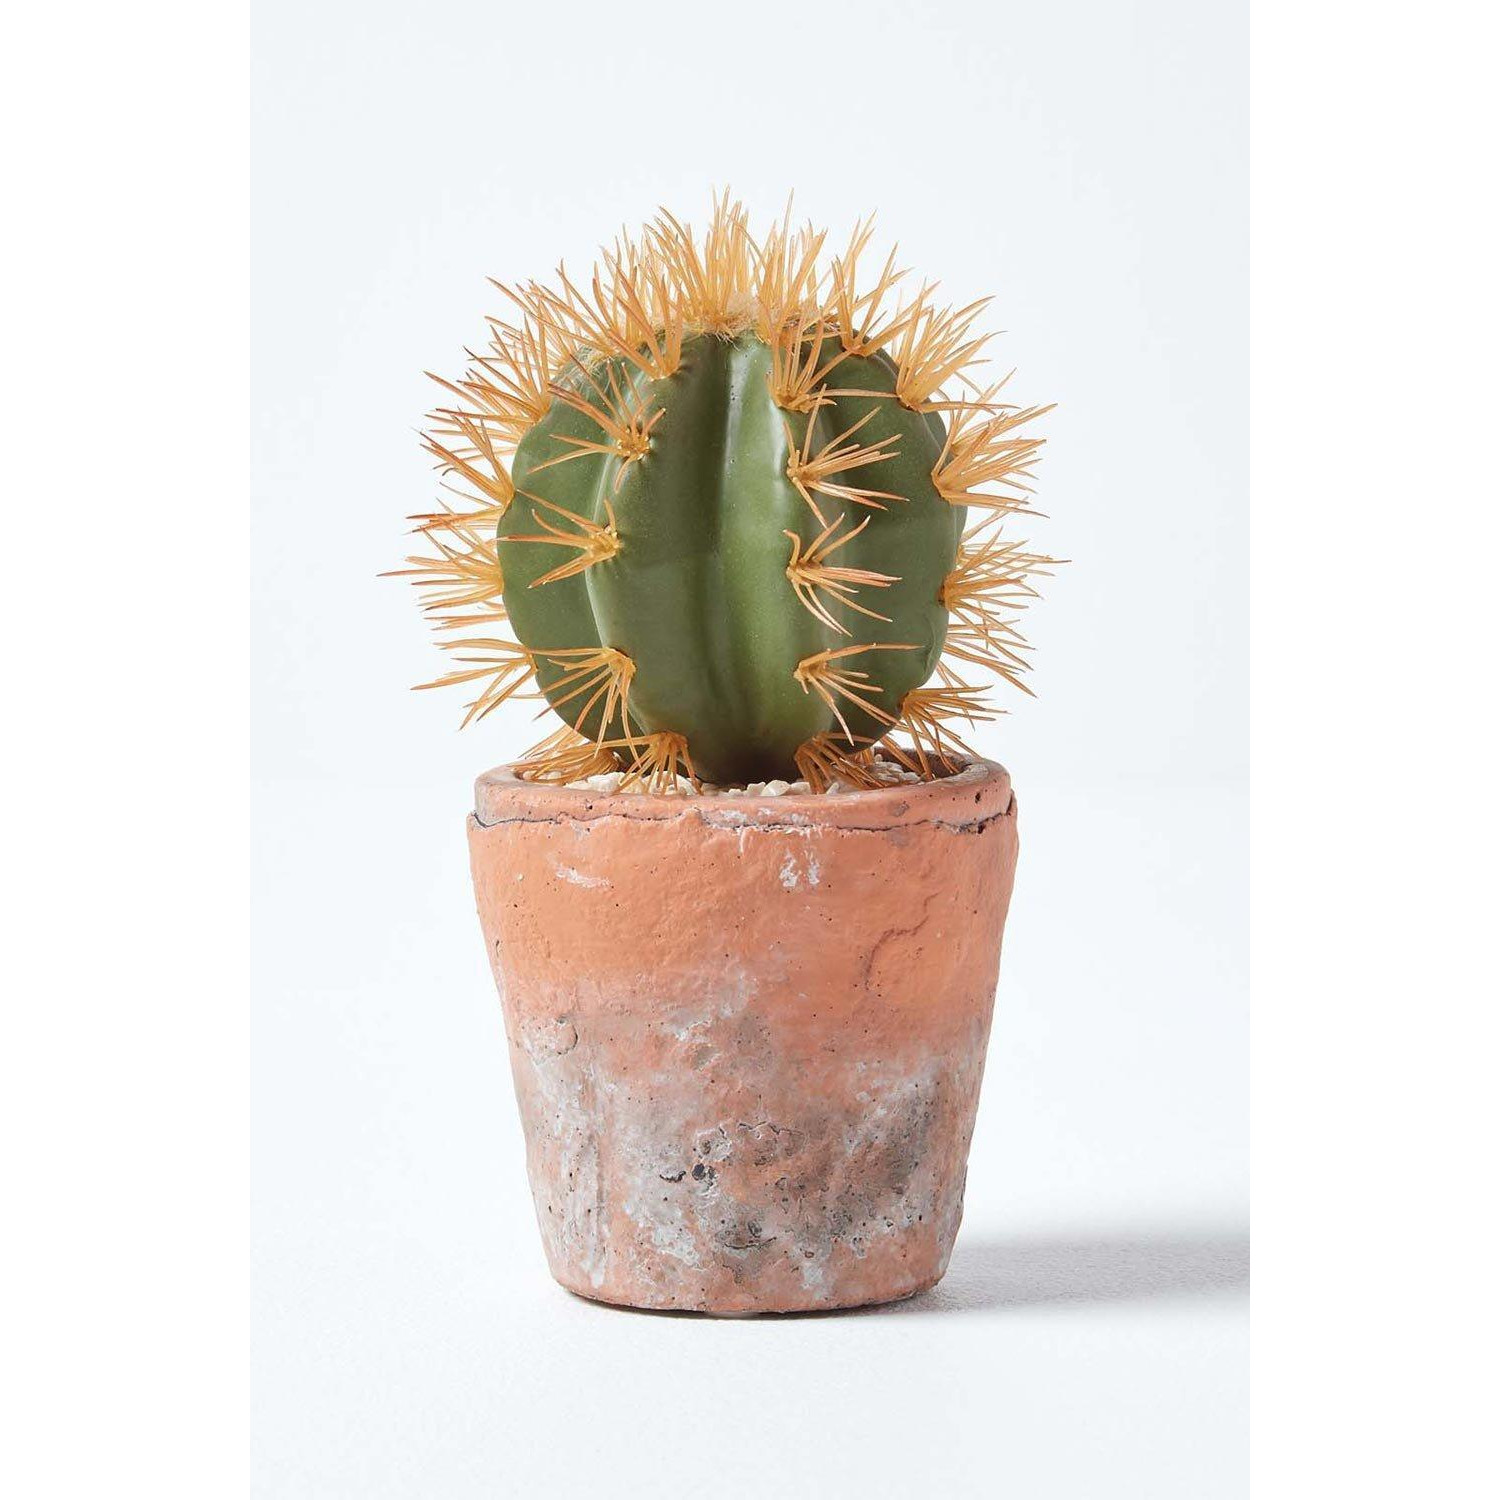 Small Round Artificial Cactus in Terracotta Pot, 15cm Tall - image 1